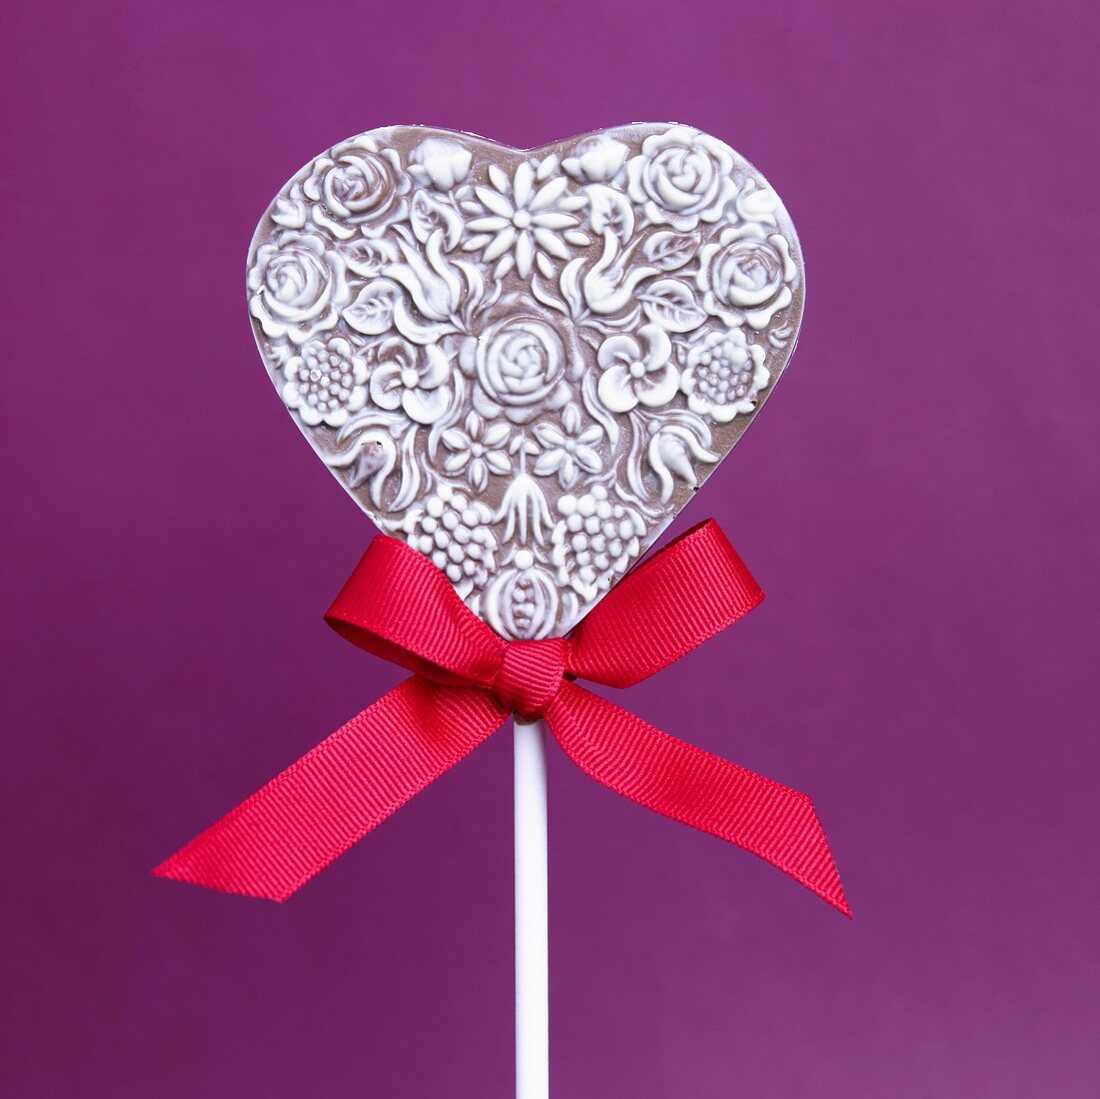 Milk and White Chocolate Heart Lollipop with Red Ribbon